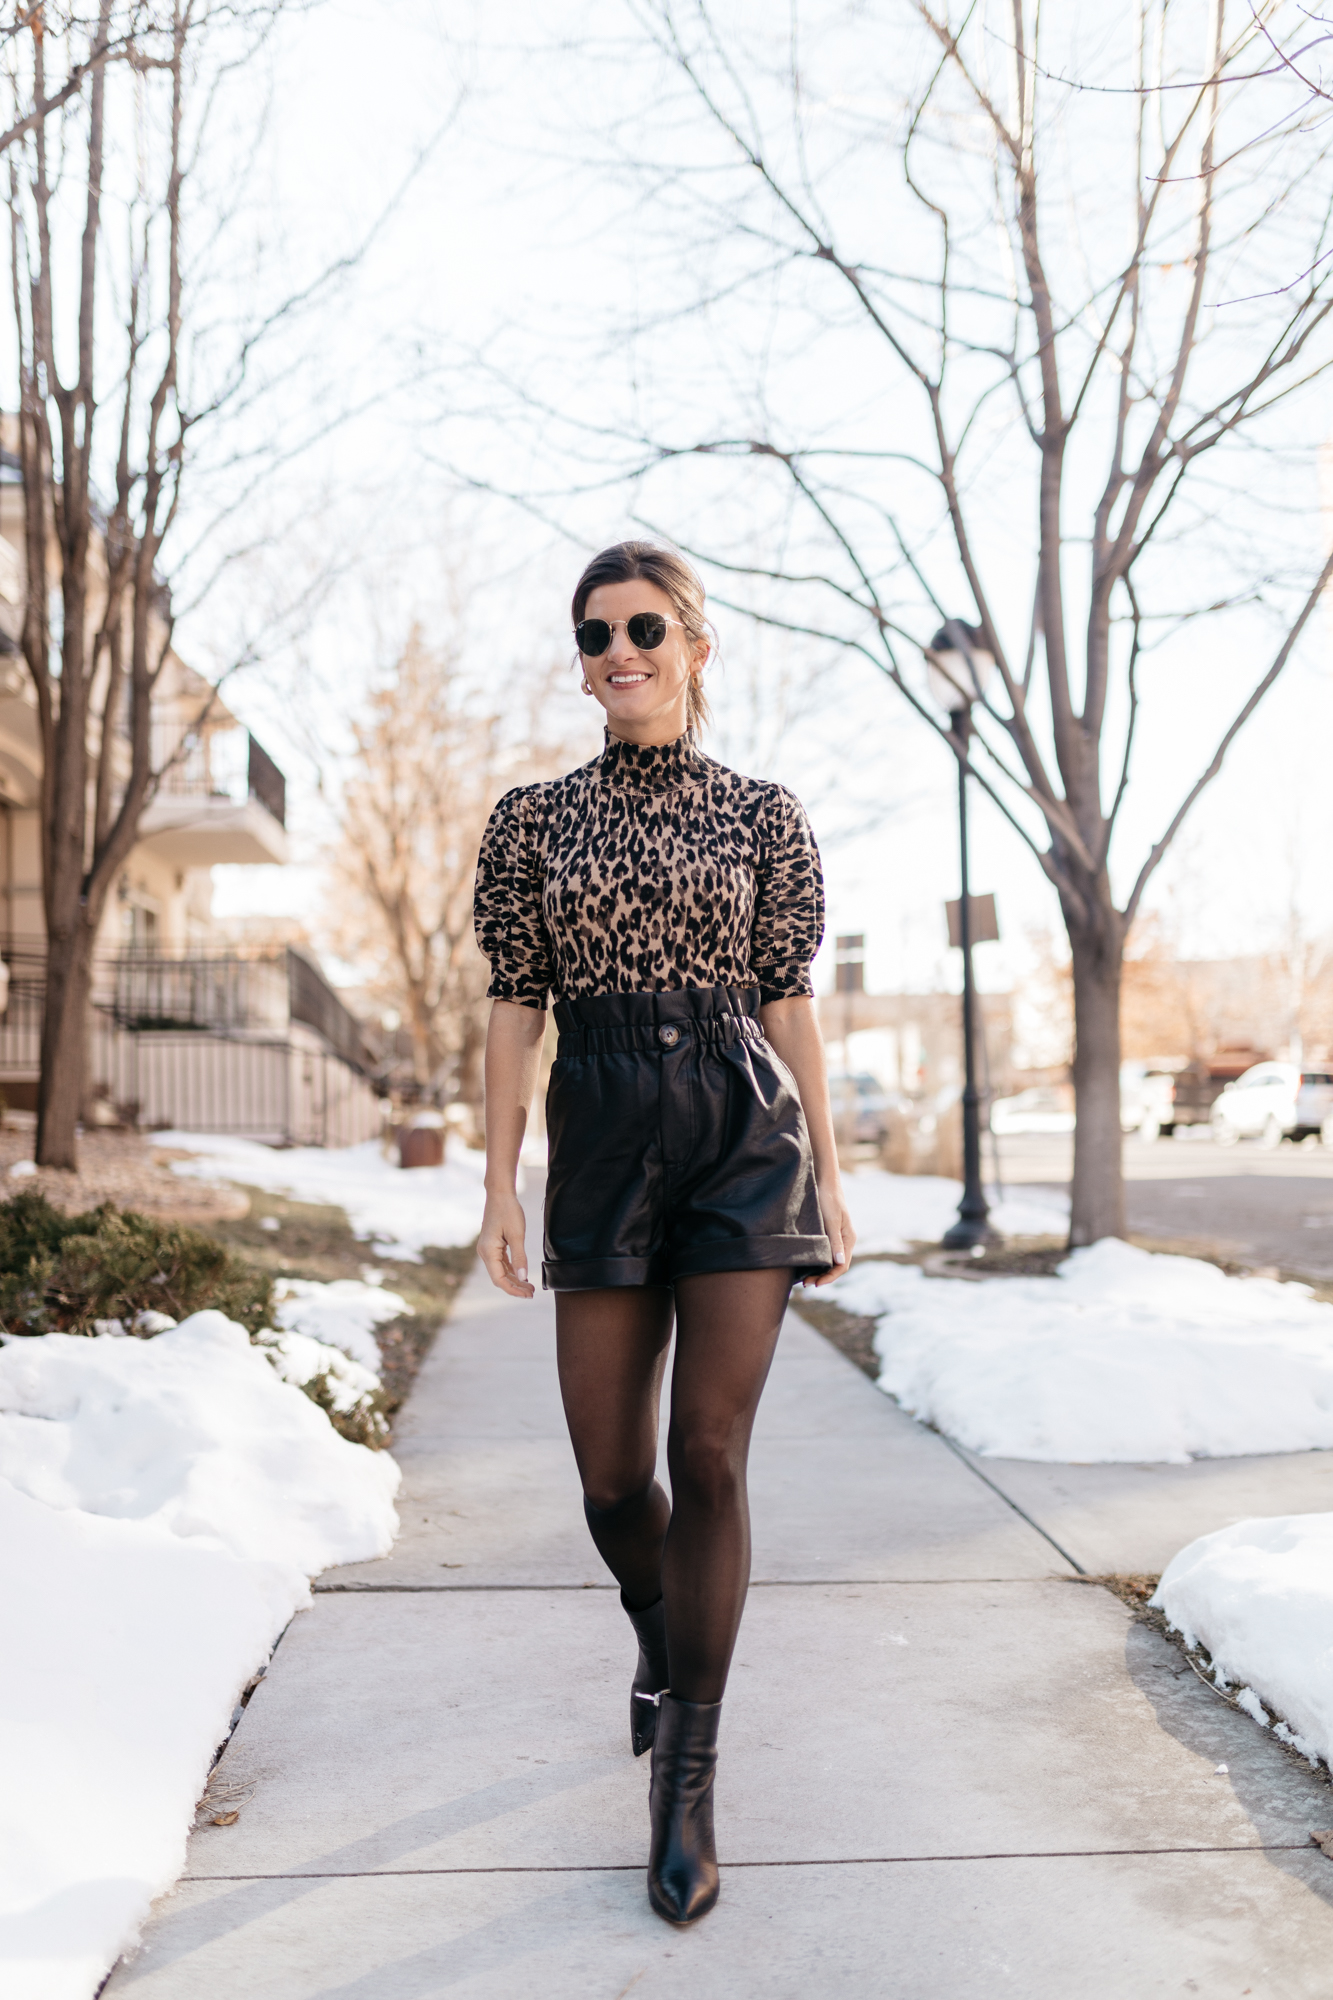 Brighton Keller wearing leopard puff sleeve short sleeve sweater and leather shorts